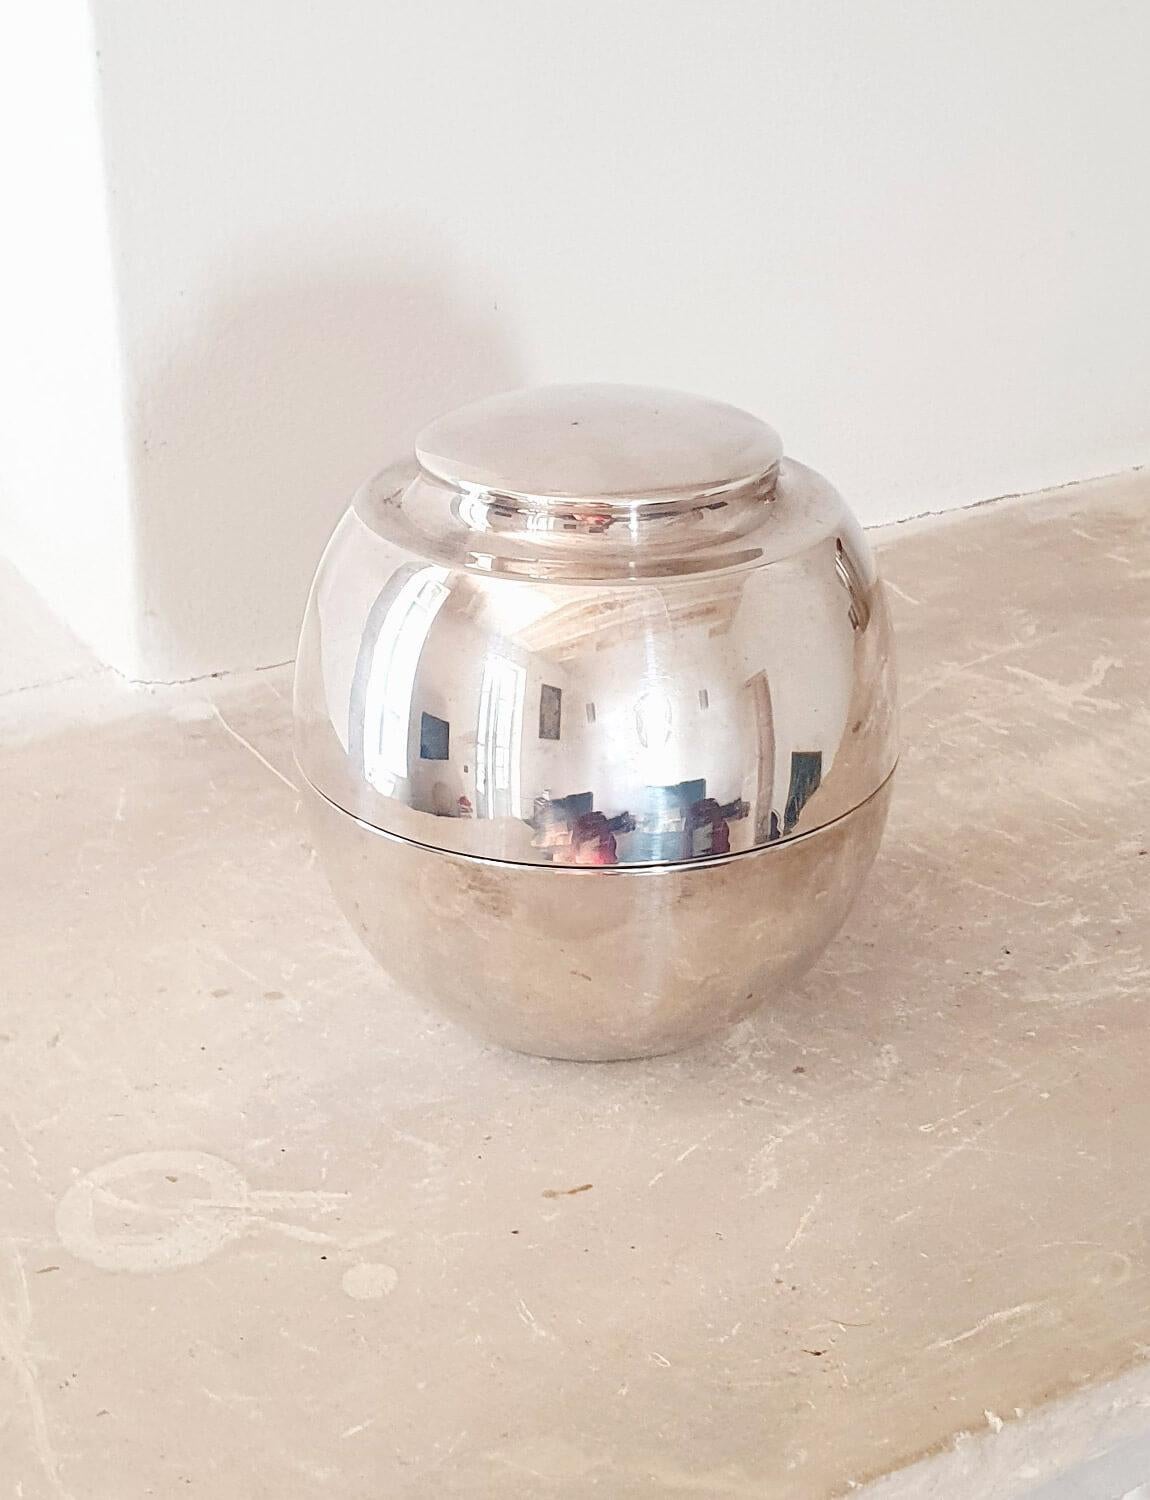 Stamped Sabattini, Made in Italy on the base, this oval silver plated decorative pot designed by Lino Sabattini in the 60s was found in Tuscany. It has a wonderful modernest shape and opens at the centre. In good condition considering its age.